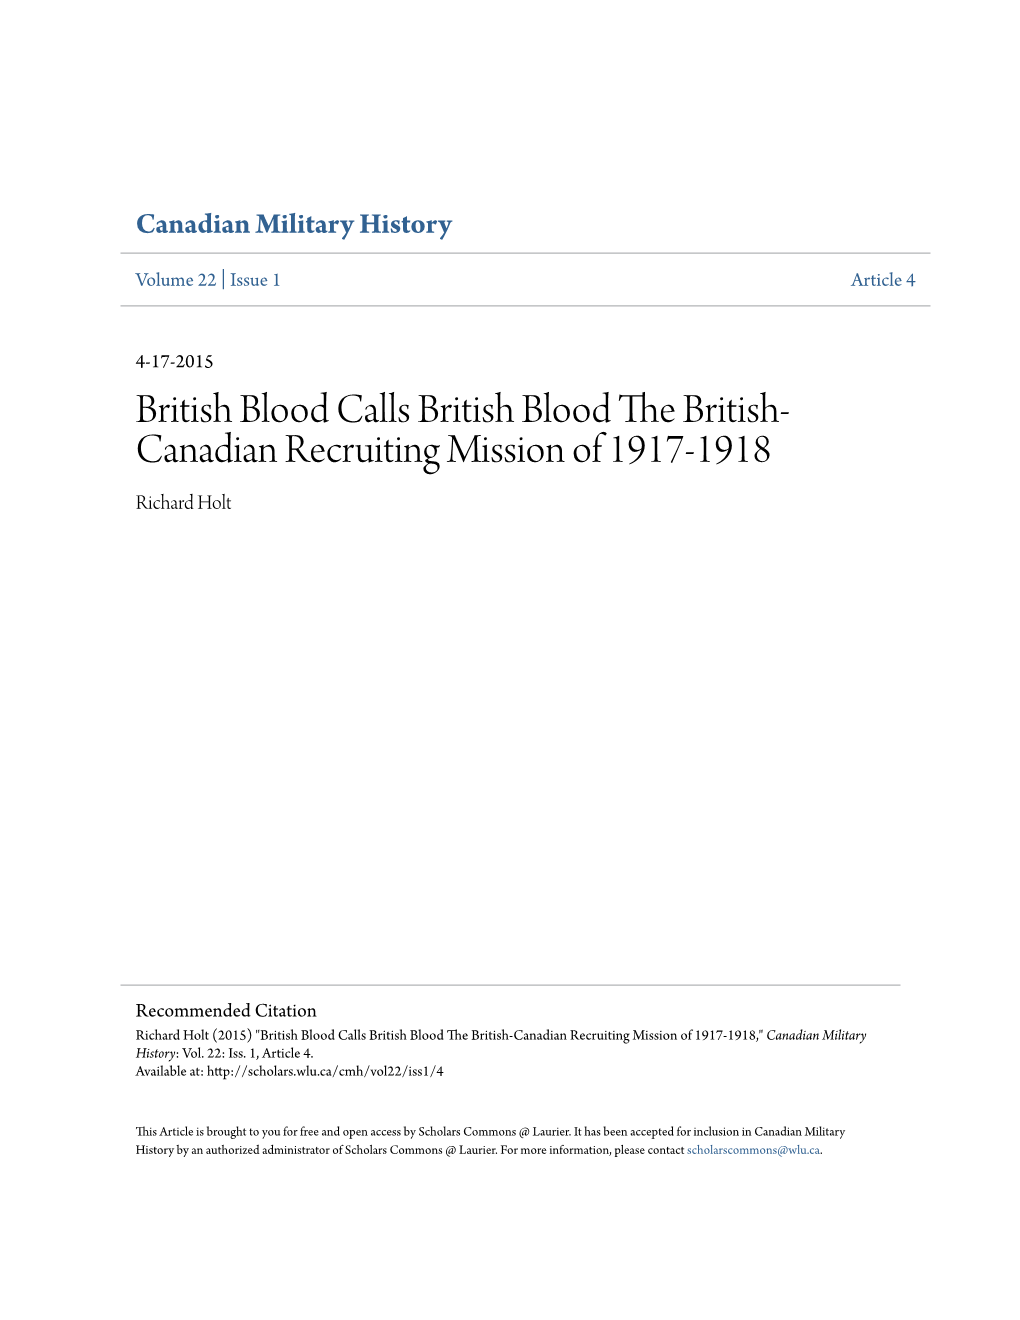 British Blood Calls British Blood the British-Canadian Recruiting Mission of 1917-1918 Canadian War Museum 19750157-001 Canadian War